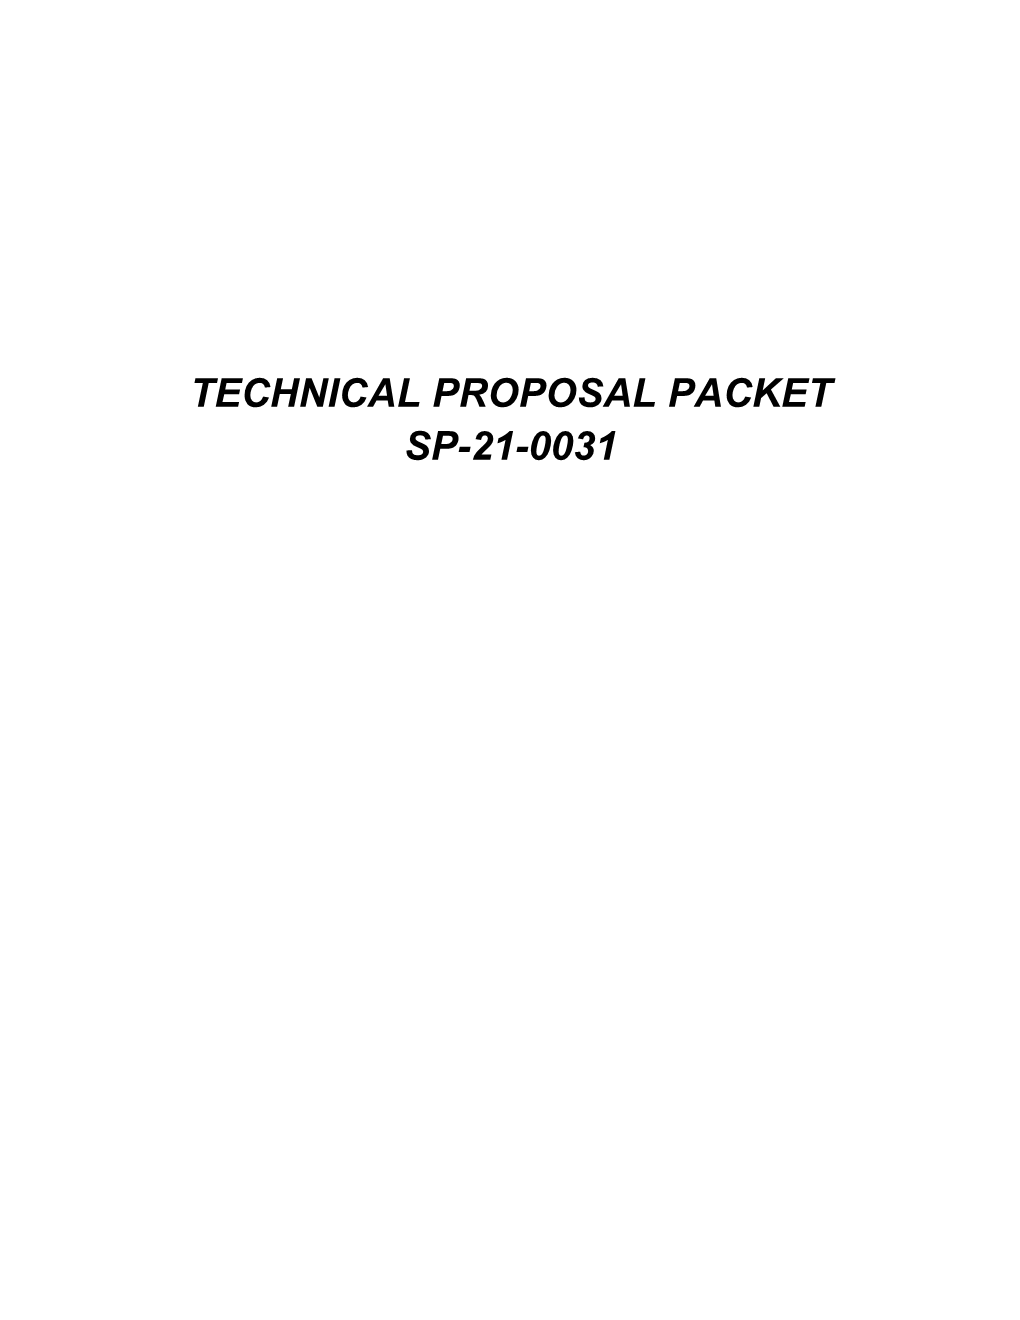 Technical Proposal Packet Sp-21-0031